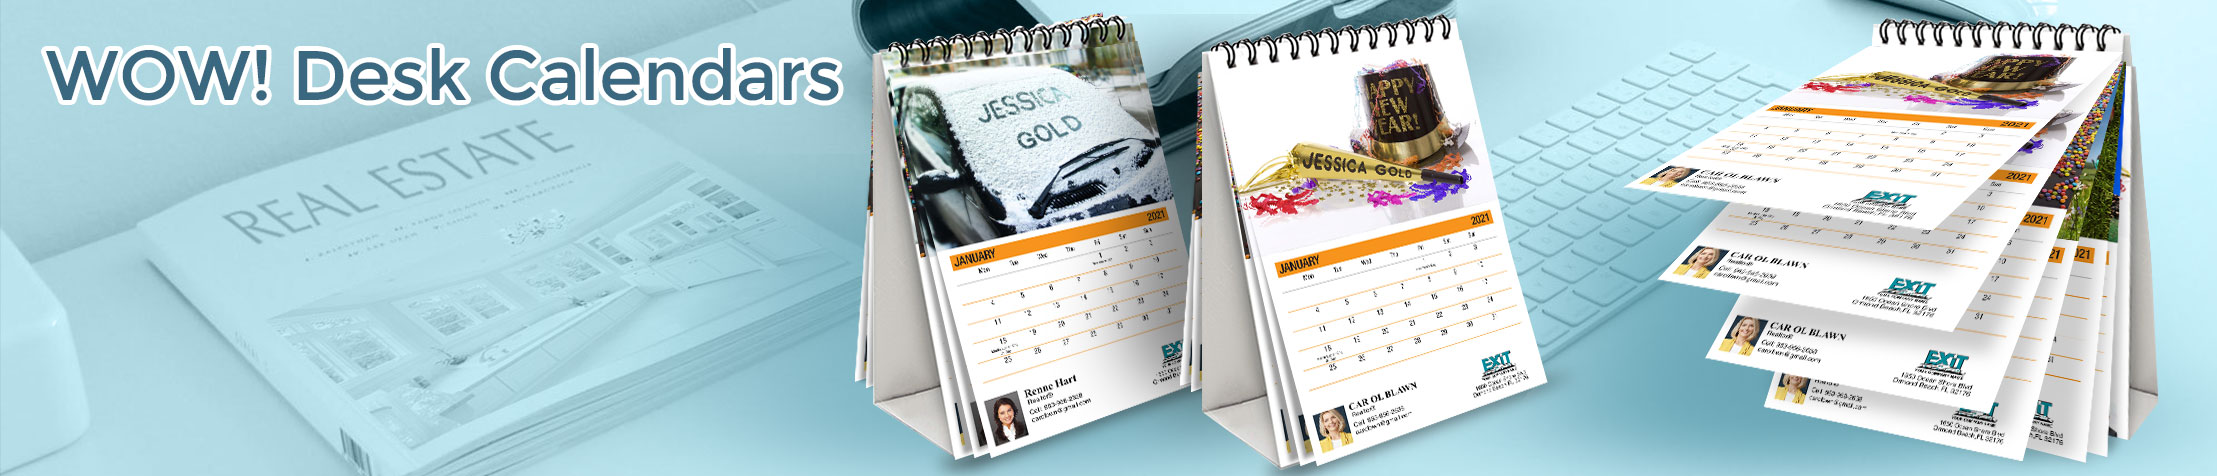 Exit Realty  WOW! Desk Calendars - Exit Realty approved vendor 2019 calendars with personalized photos | BestPrintBuy.com